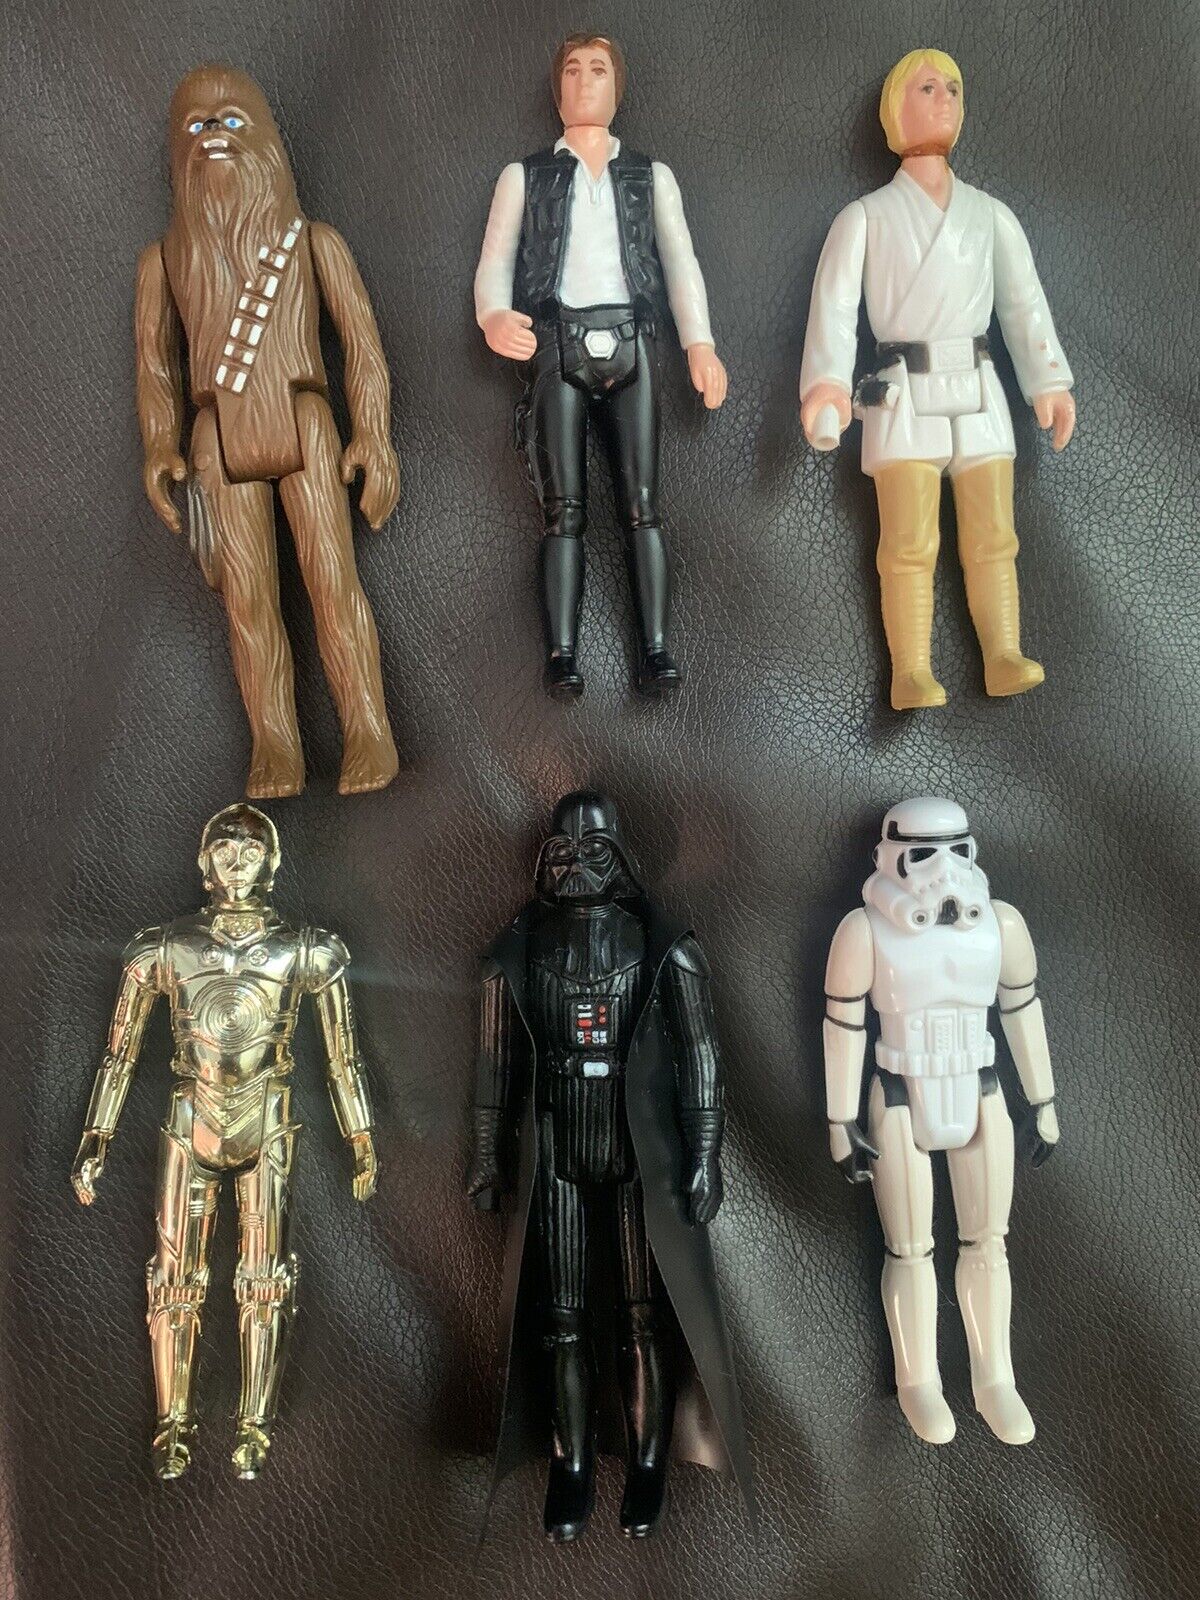 Lot Of 6, 1977 Star Wars Action Figures, Dearth Vader, Luke, Han, Chewy, C3P0